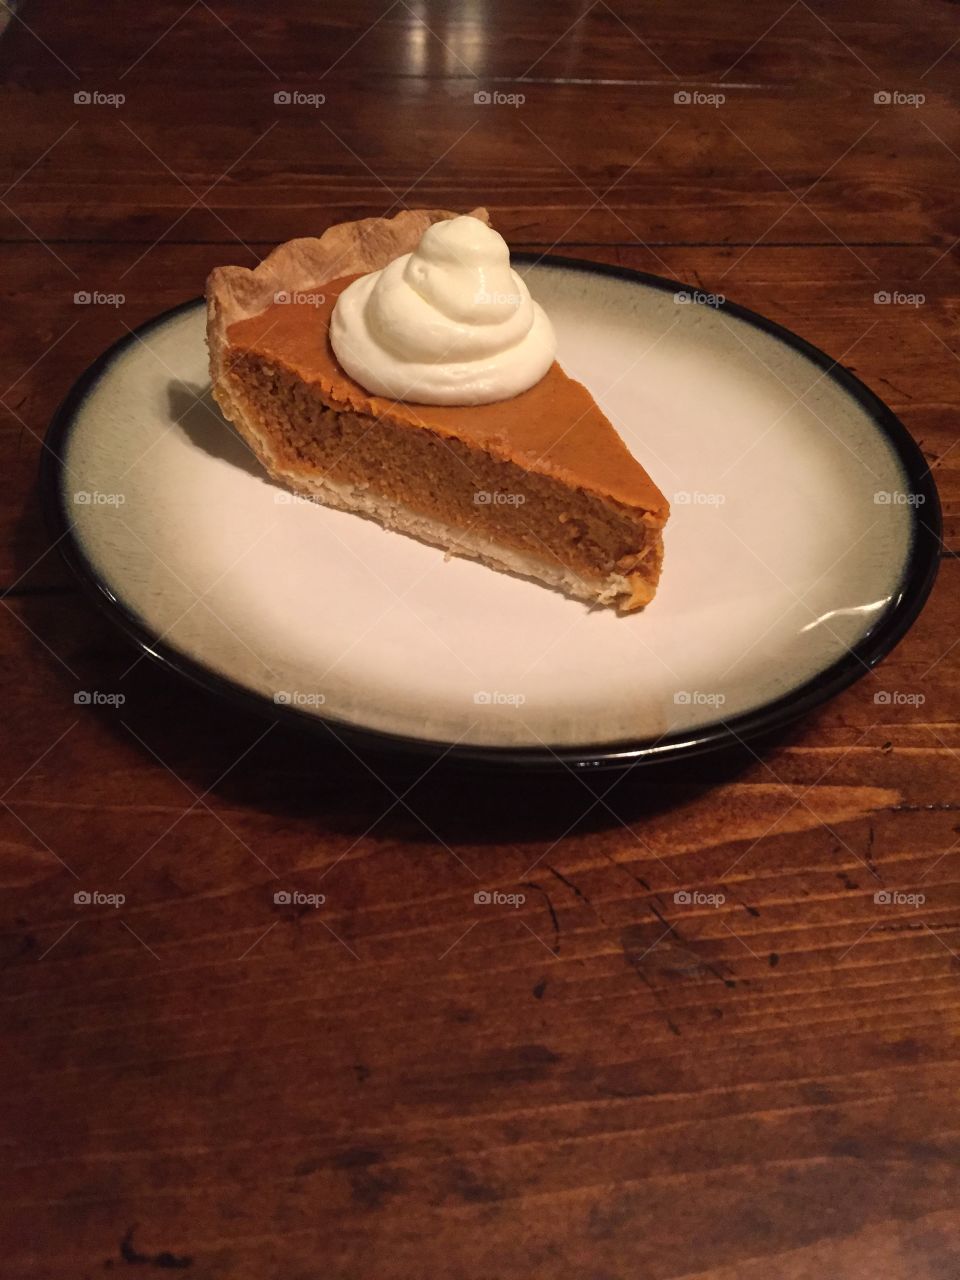 Perfect slice of homemade pumpkin pie with homemade whipped cream!!